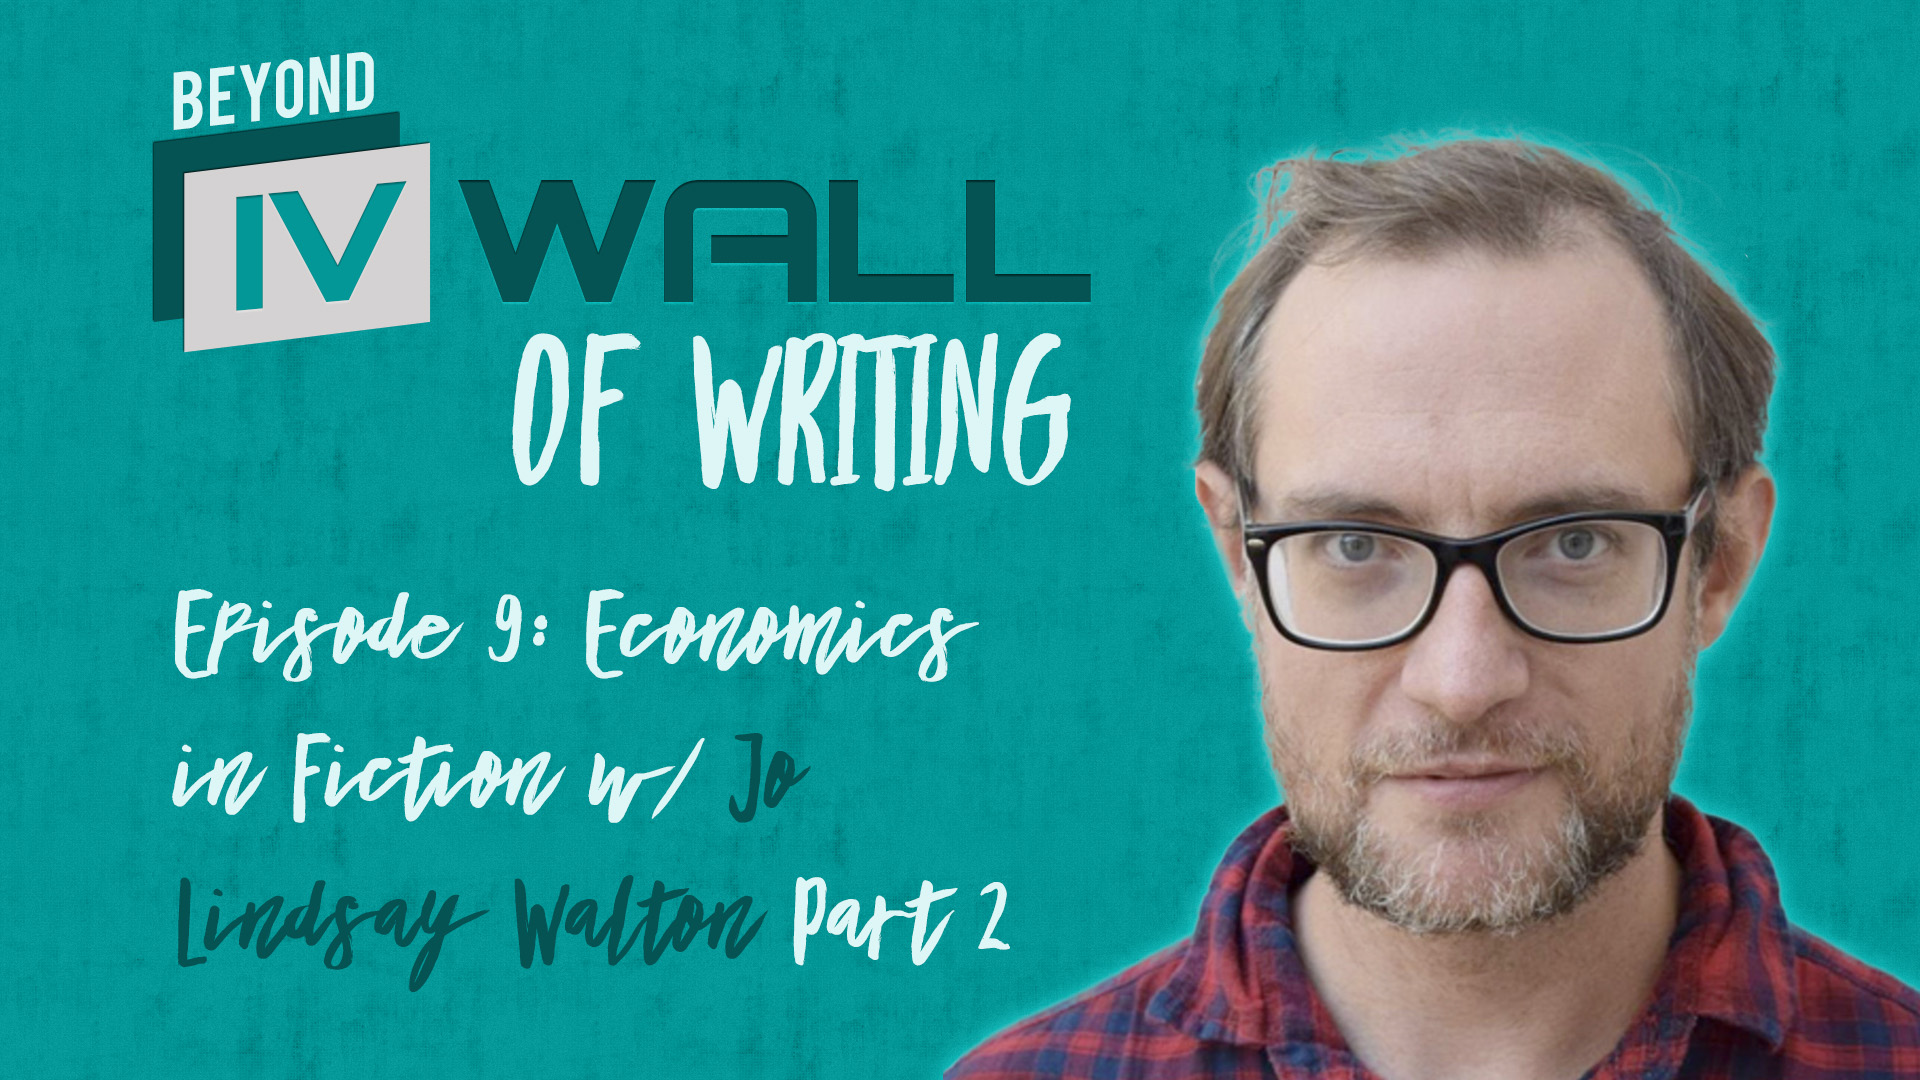 Beyond the IVWall of Writing: Episode 9- Economics in Fiction with Jo Lindsay Walton Part 2